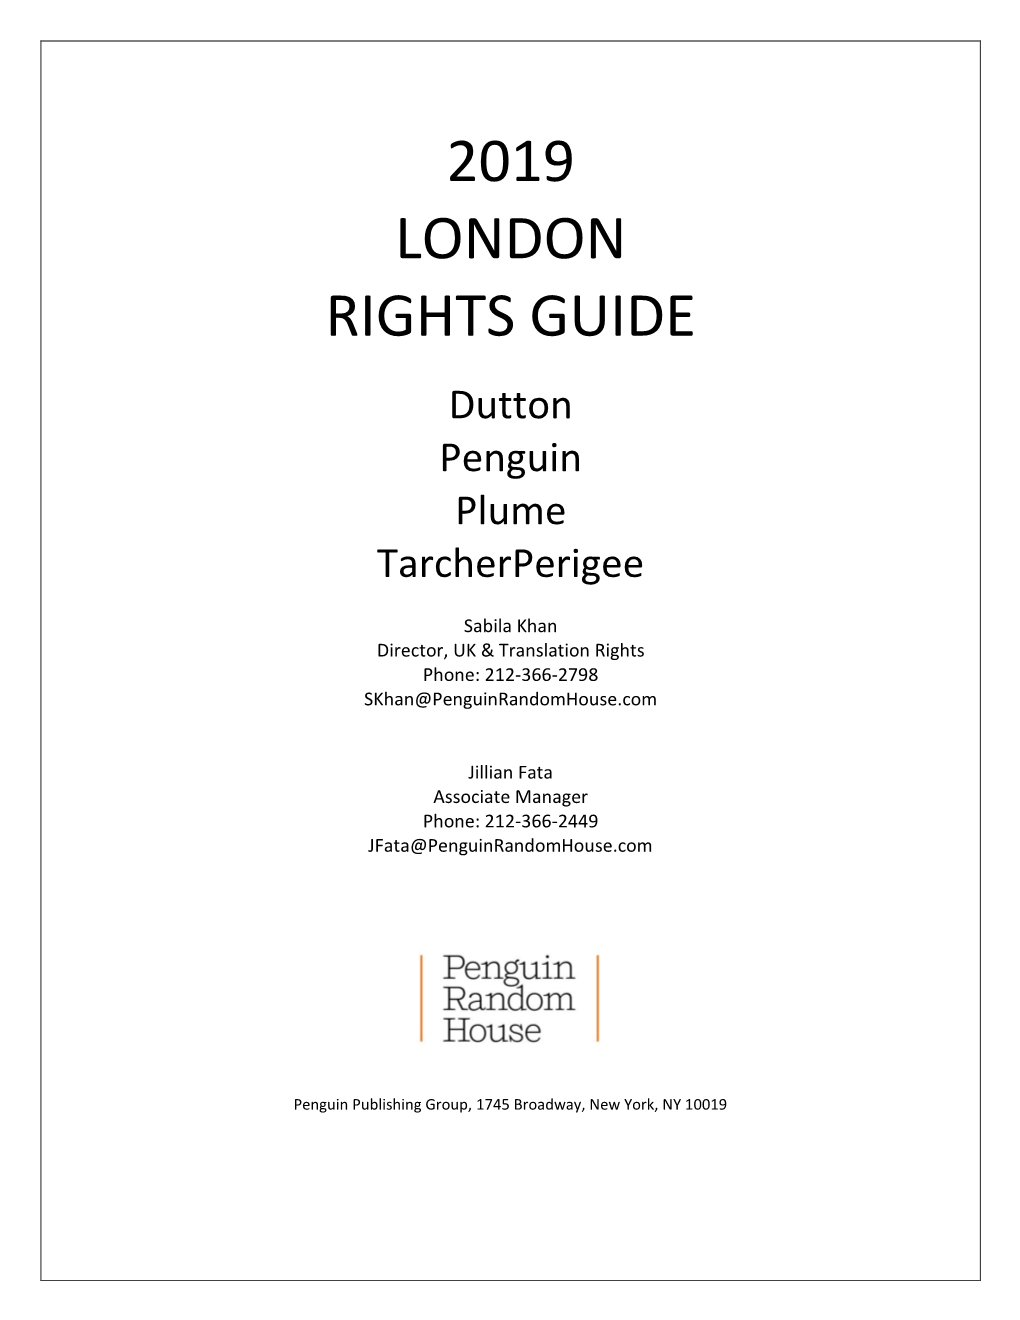 2019 London Rights Guide